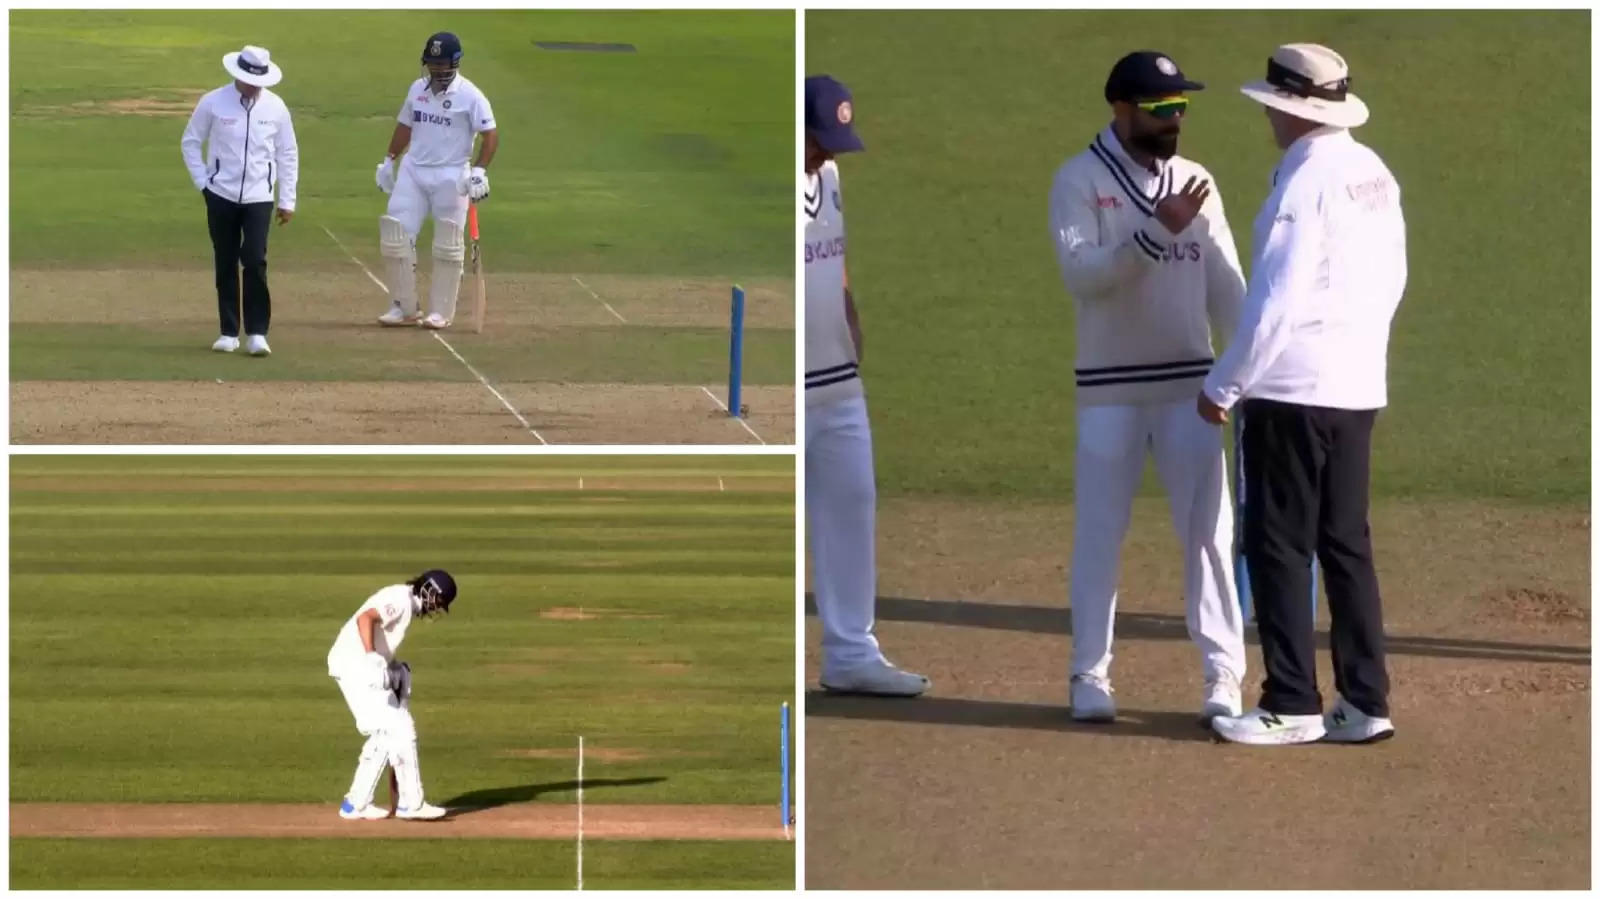 Why was Kohli complaining to the umpire about Haseeb Hameed?